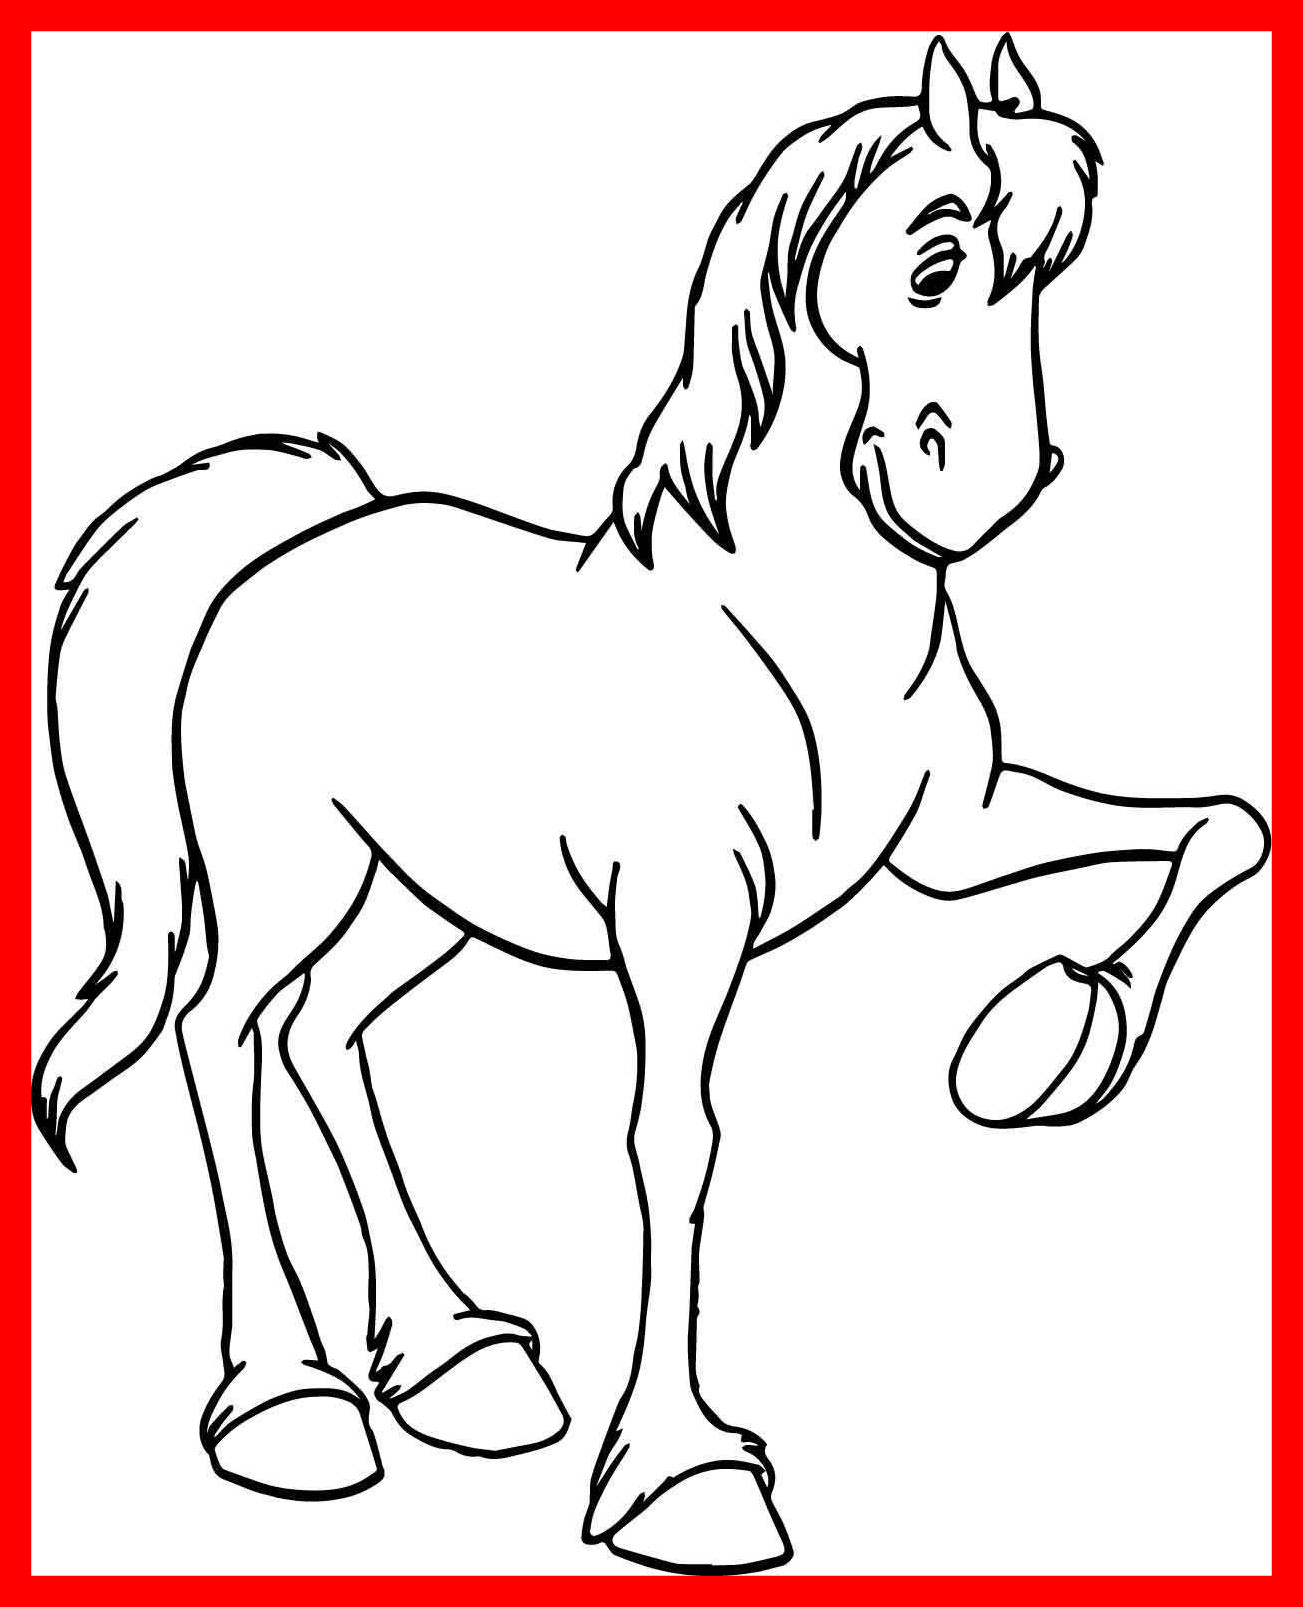 Arabian Horse Coloring Pages at GetColorings.com | Free ...